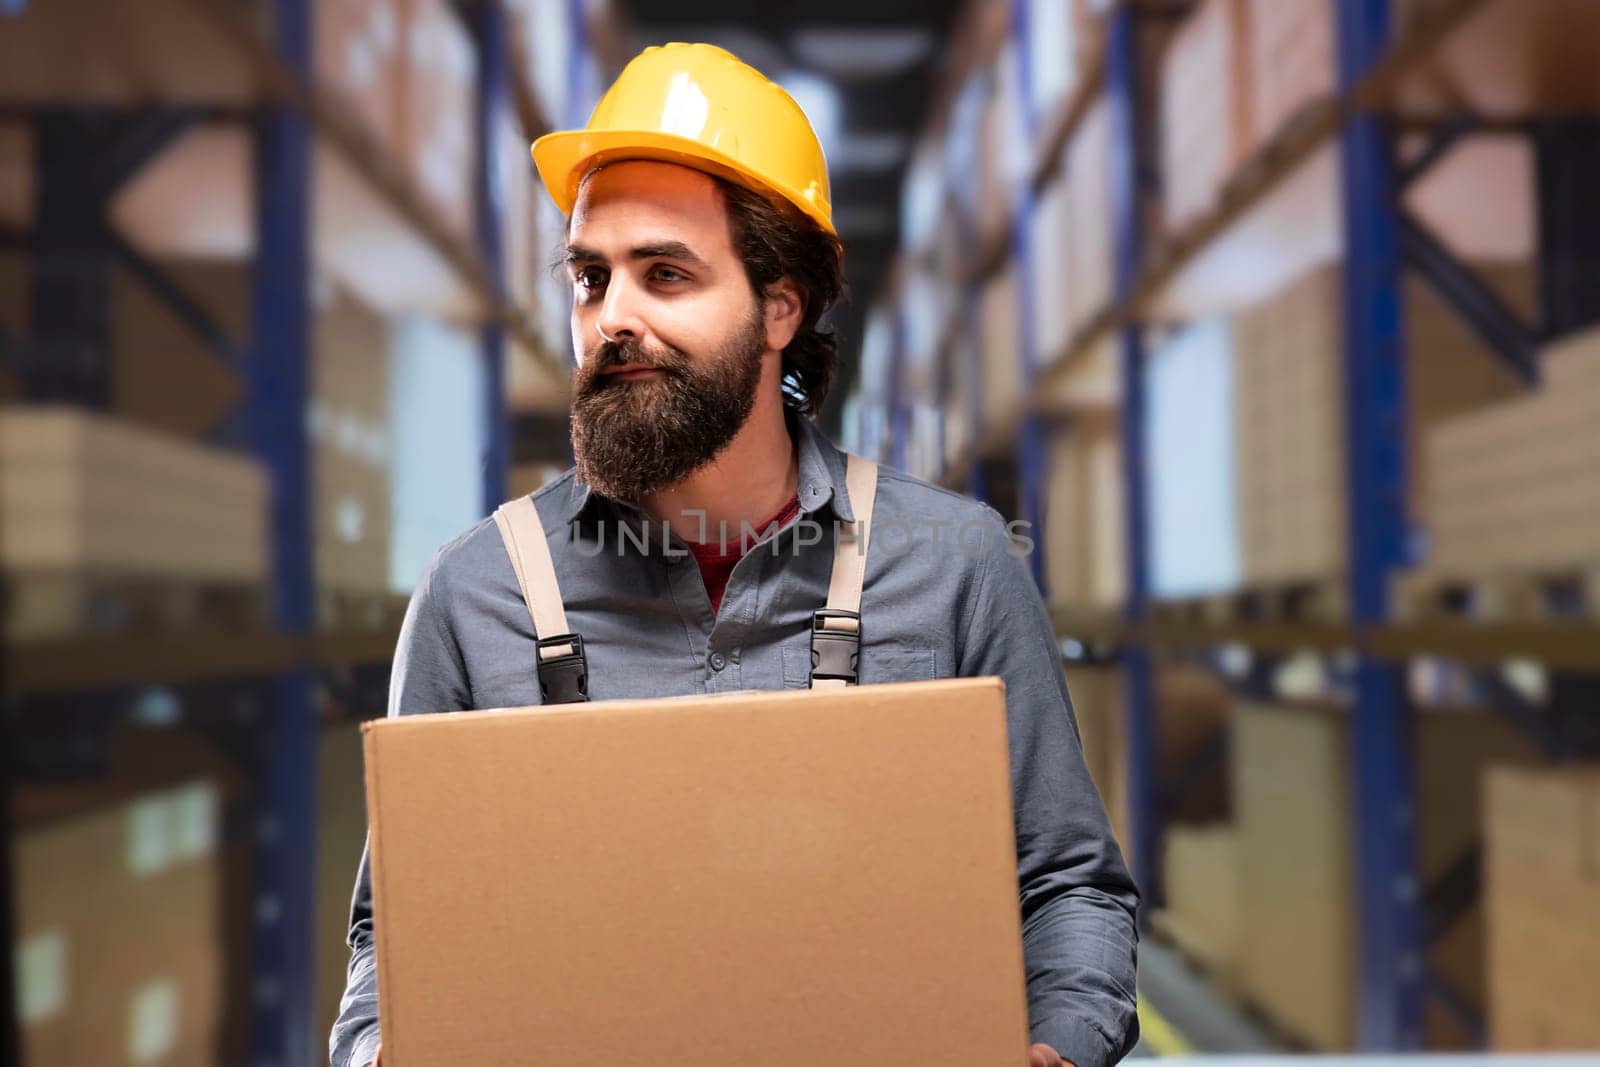 Packaging supervisor carrying products boxes in warehouse, trying to organize cargo and production based on order invoices or label numbers. Depot worker preparing packages on racks.